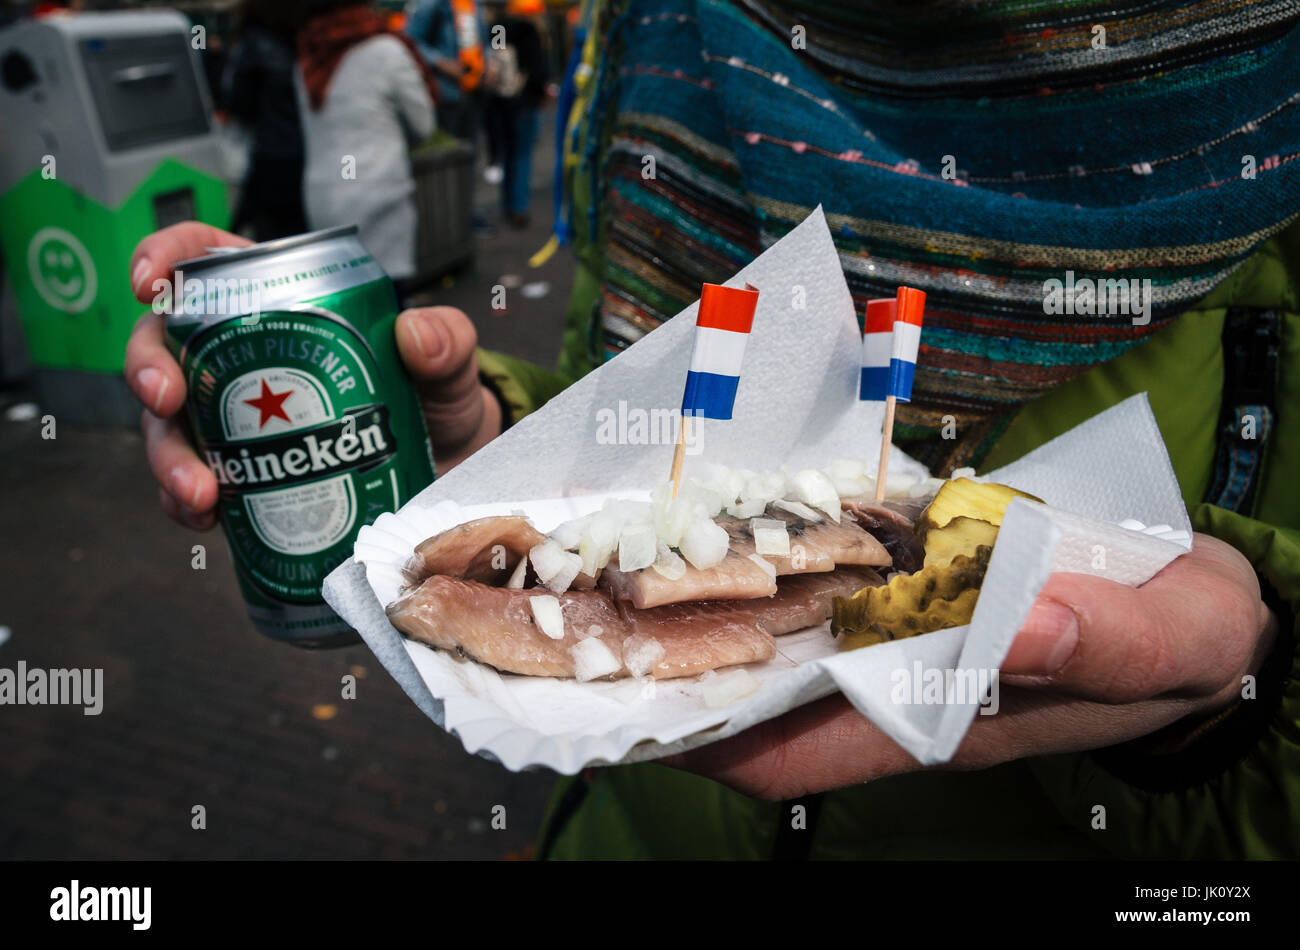 Amsterdam, Netherlands - 25 April, 2017: Hands hold a beer Heineken and a traditional Dutch delicacy of herring with gherkins and onions. Stock Photo